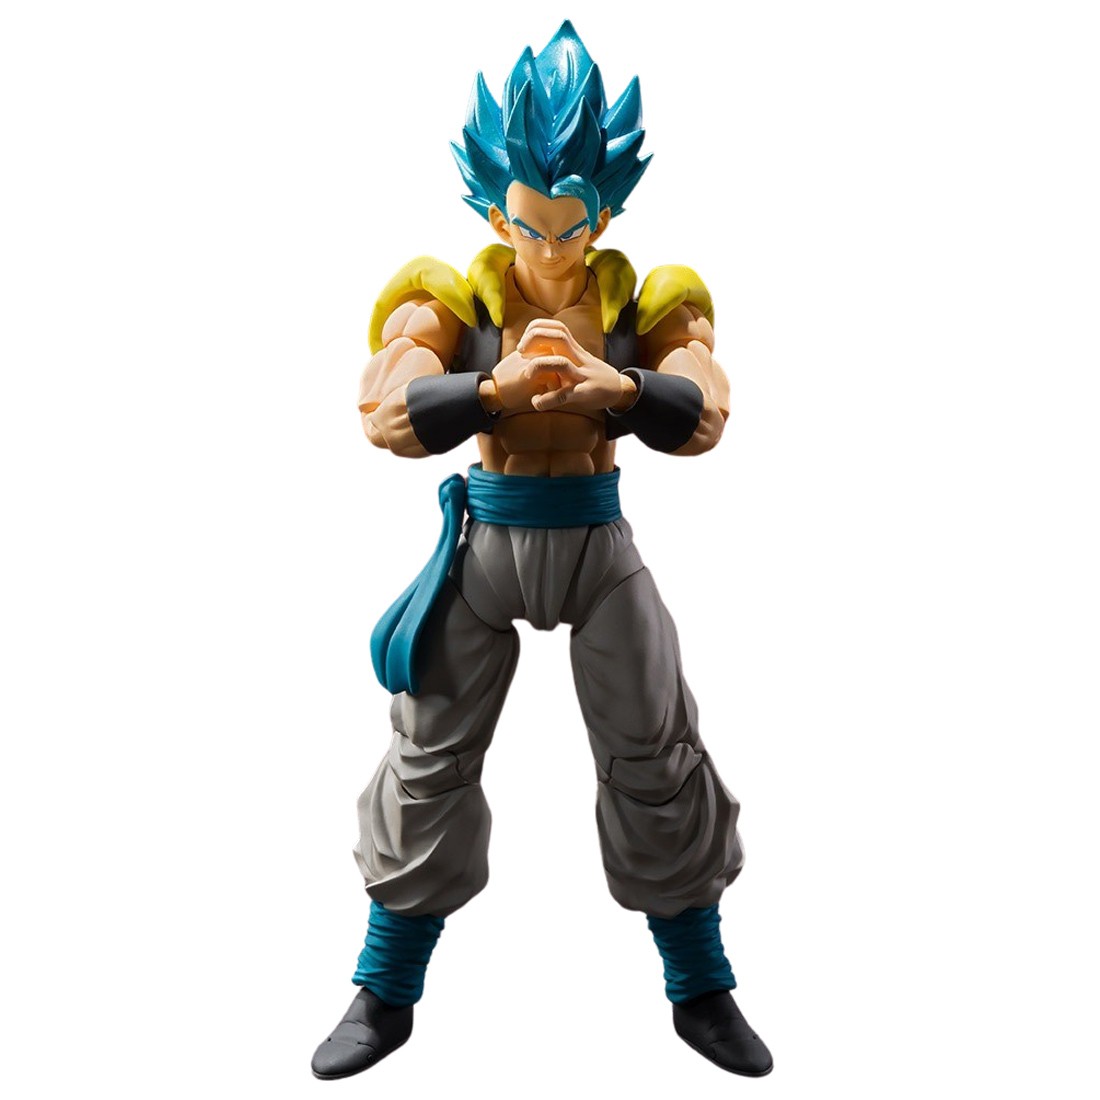 Bandai spy!! Broly anniversary is in 14 of November how about new lr blue  gogeta with counter and dodge animation like the below me and the ko screen  , it would be